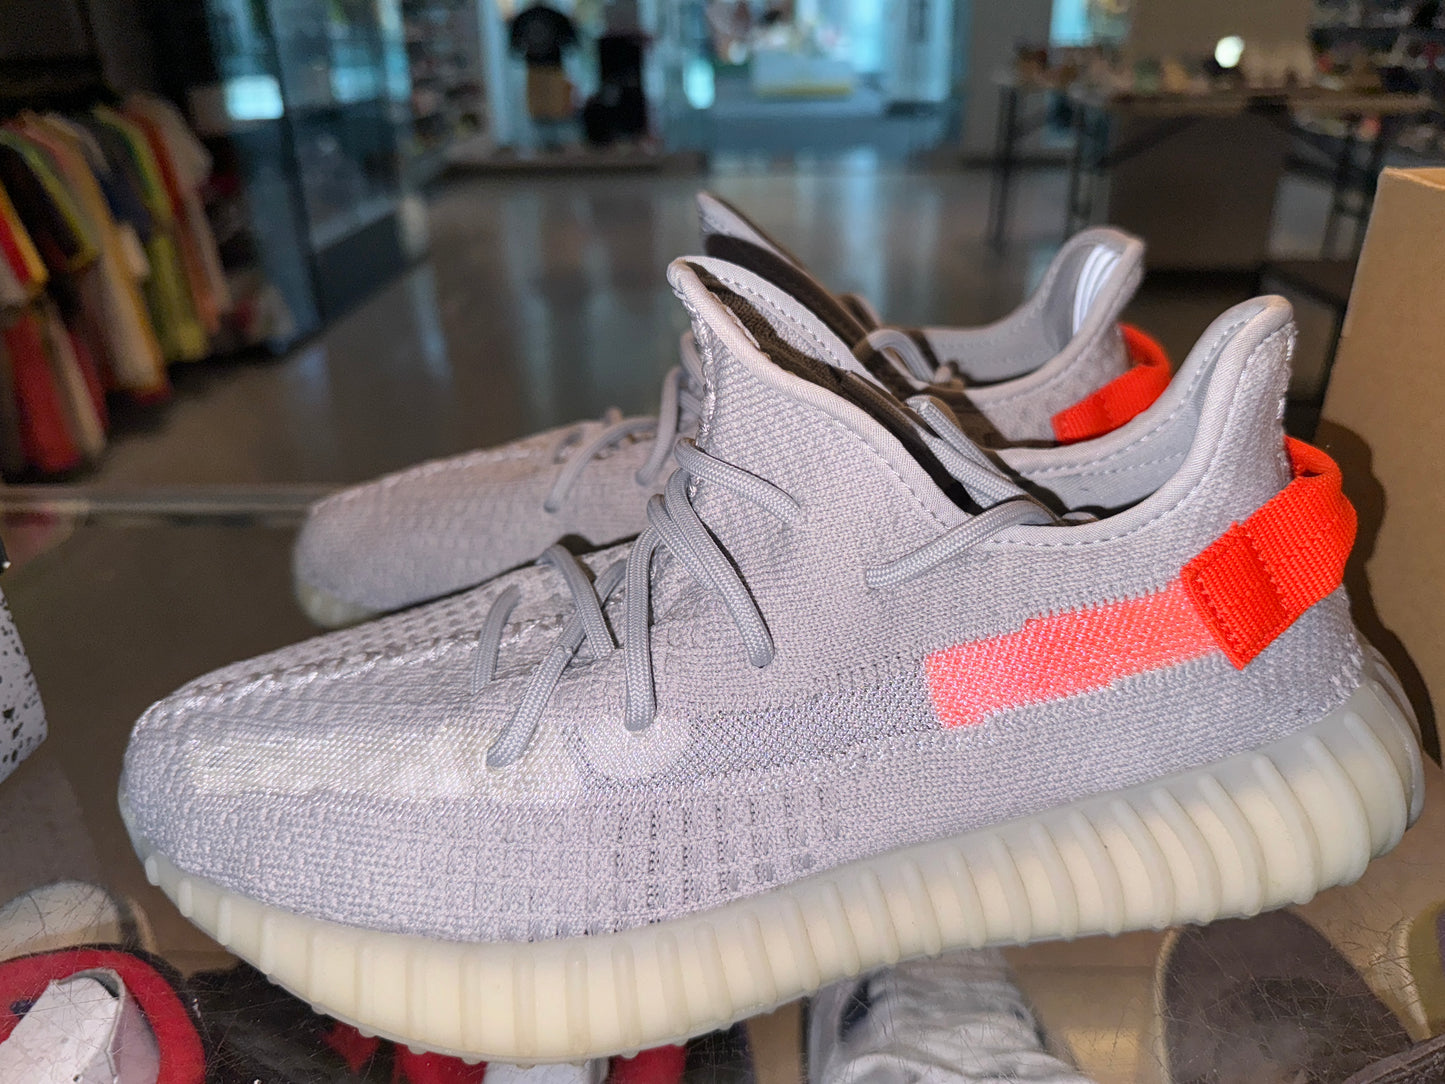 Size 9 Adidas Yeezy Boost 350 v2 “Taillight” (Mall)